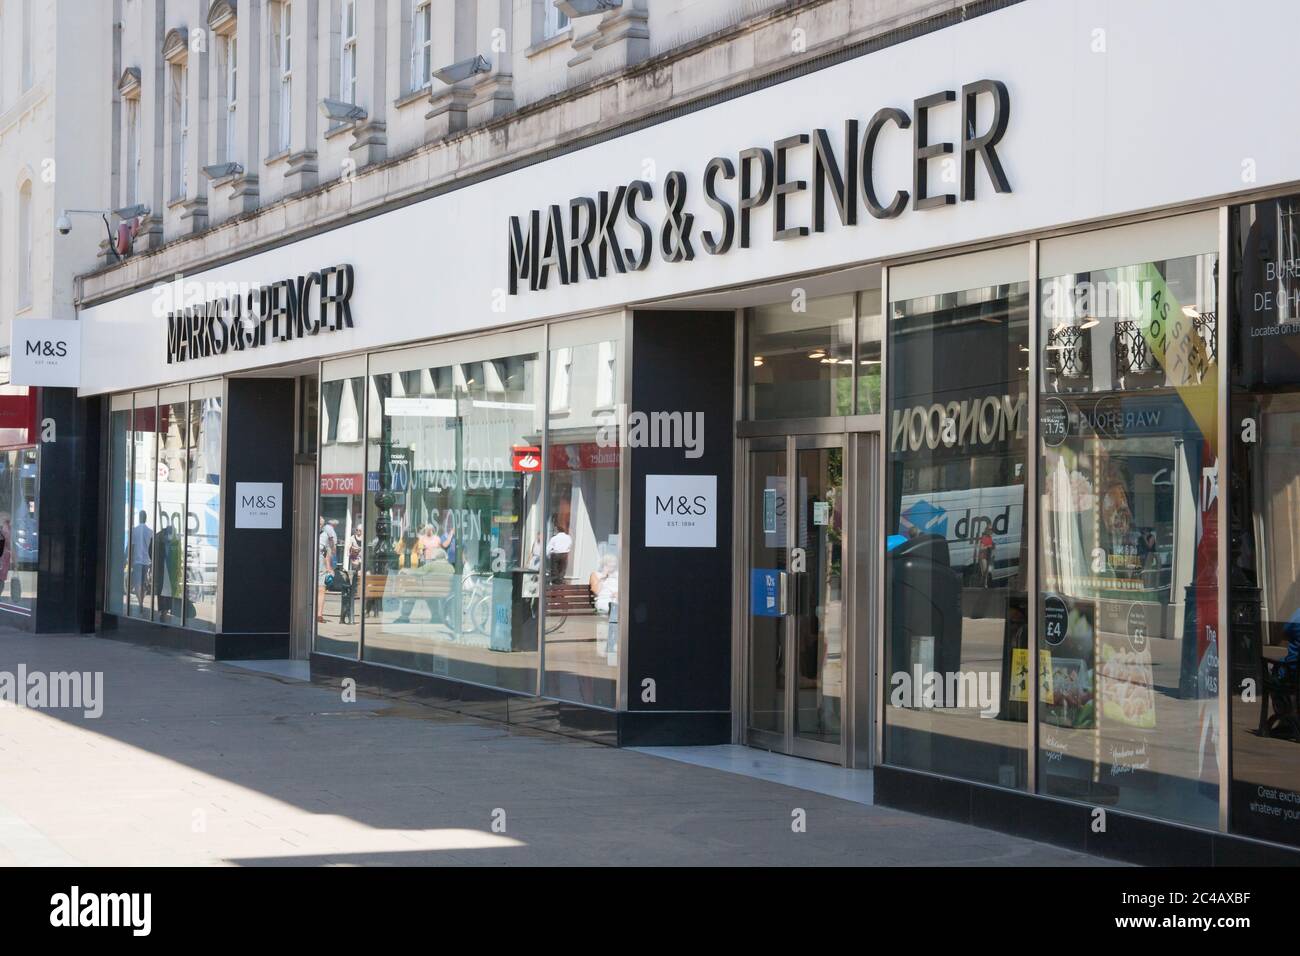 The Marks & Spencer department store in Cheltenham, Gloucestershire in the UK Stock Photo